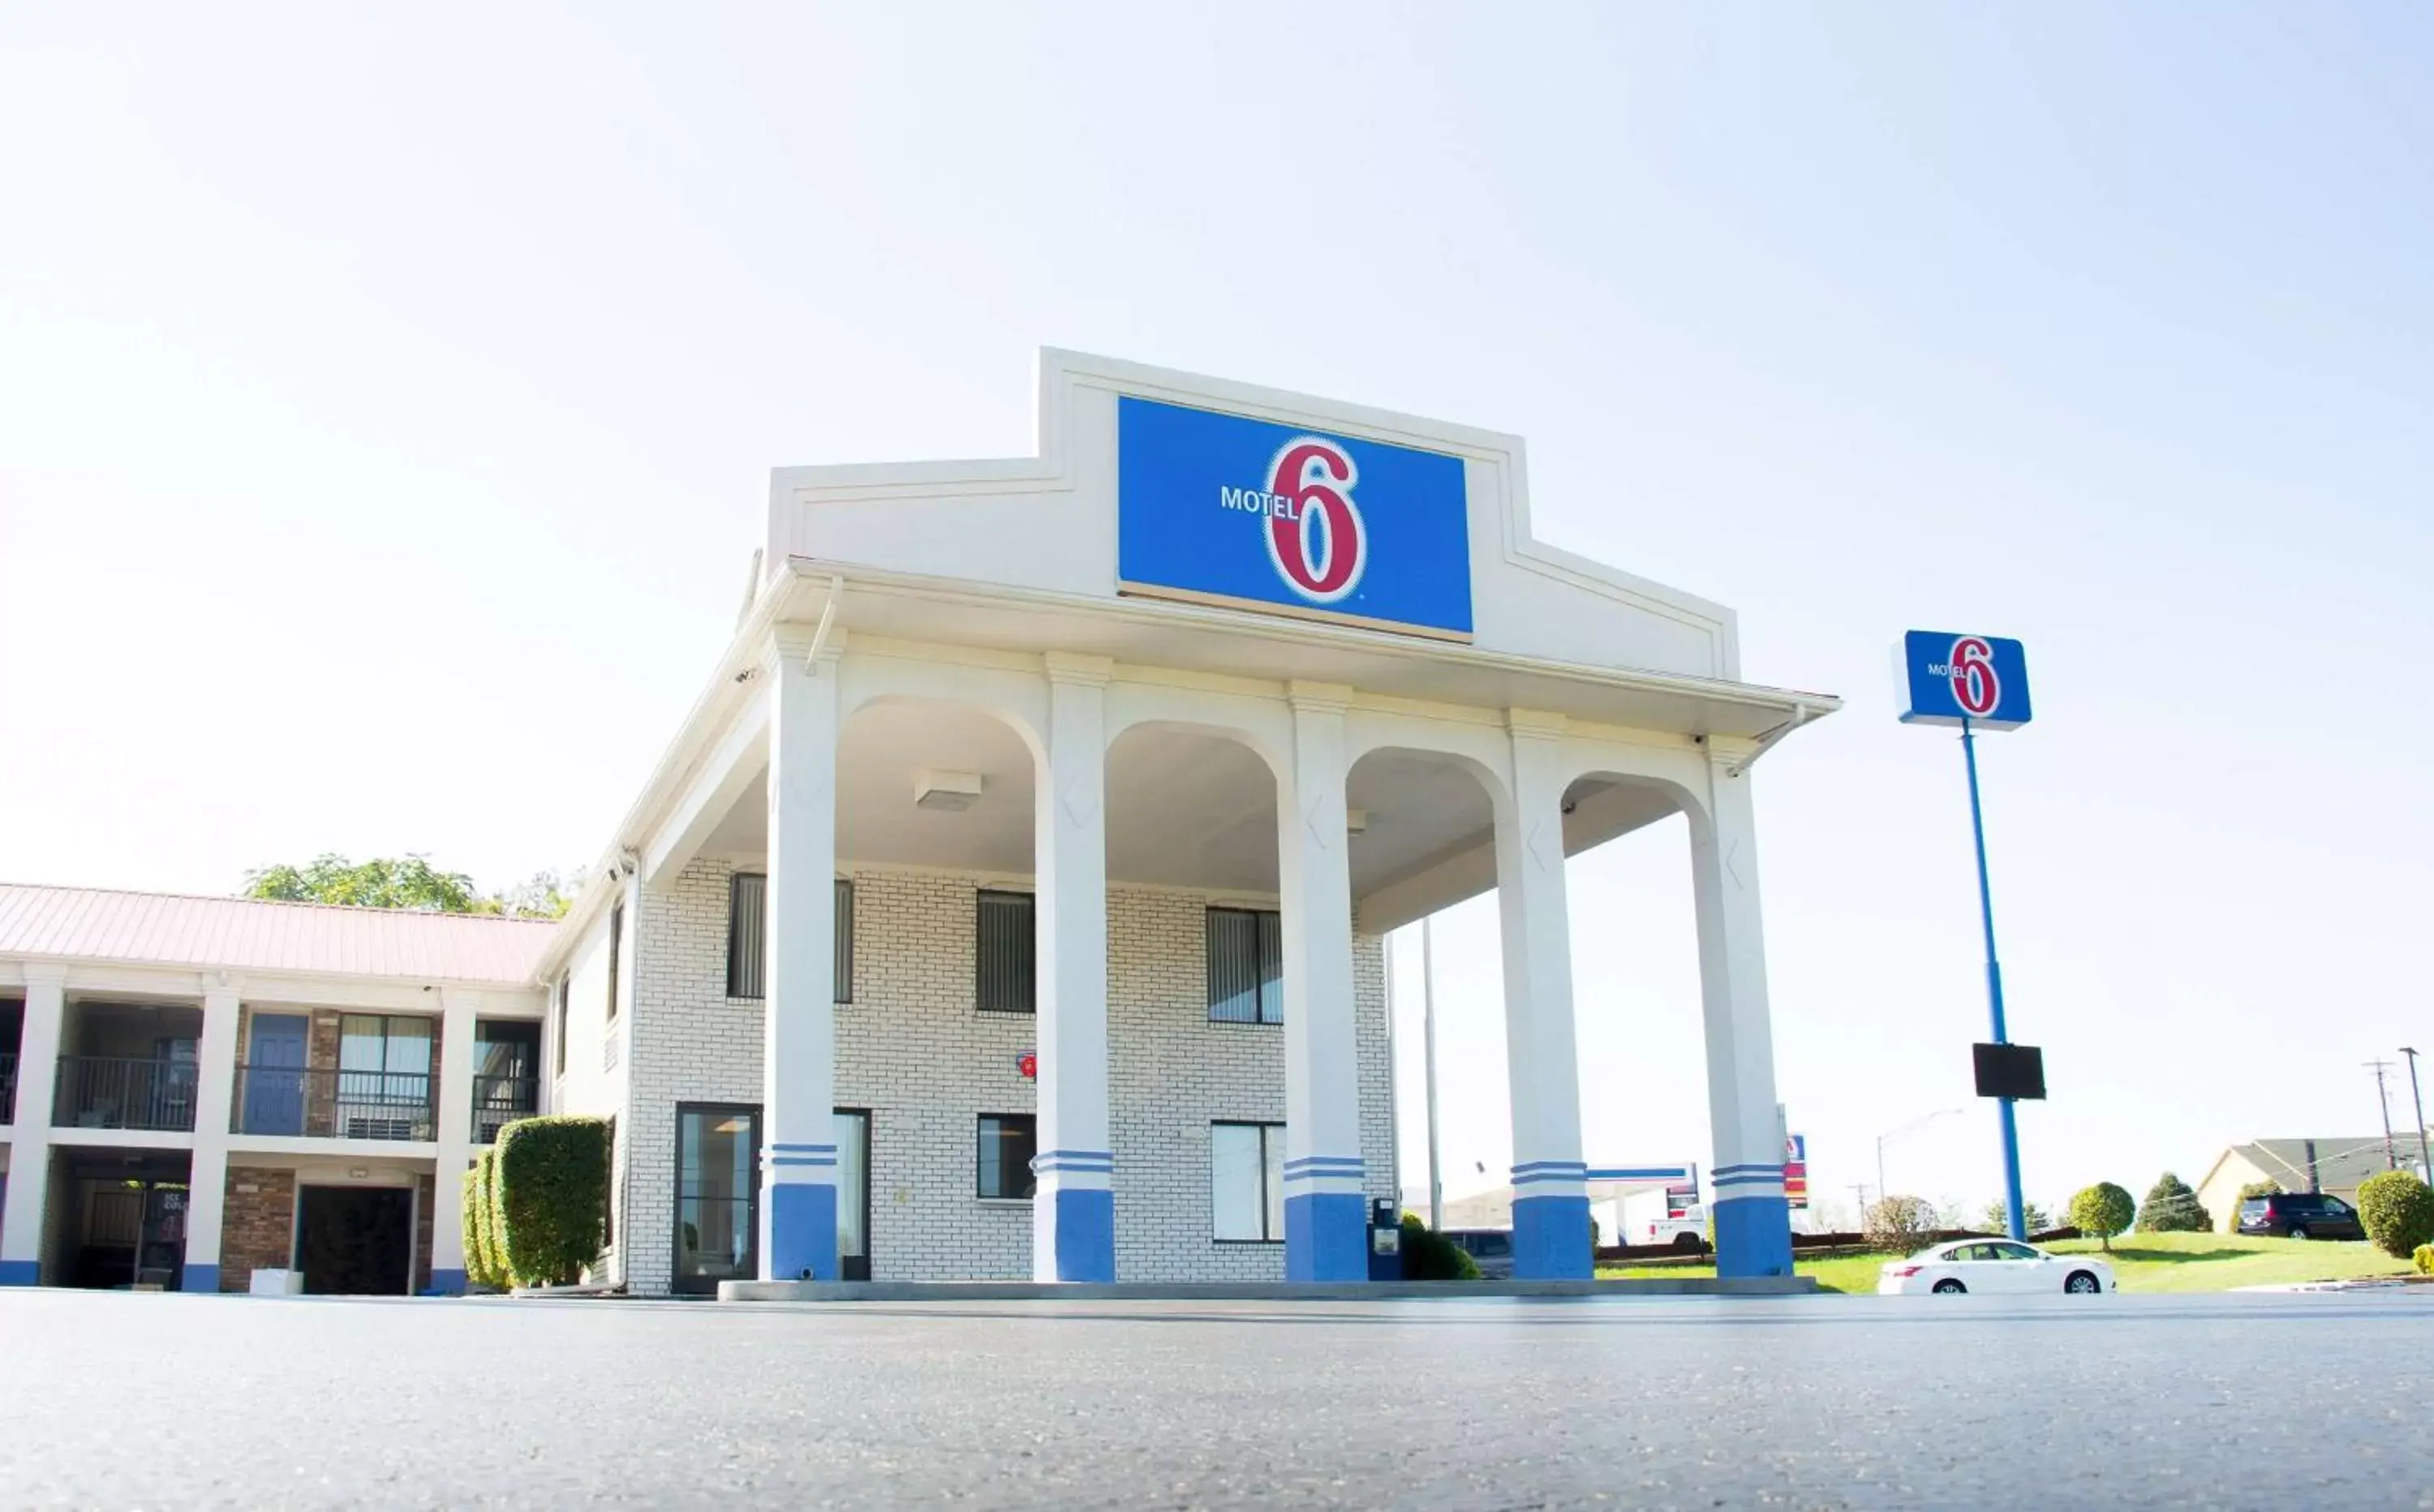 Property building in Motel 6-Cookeville, TN